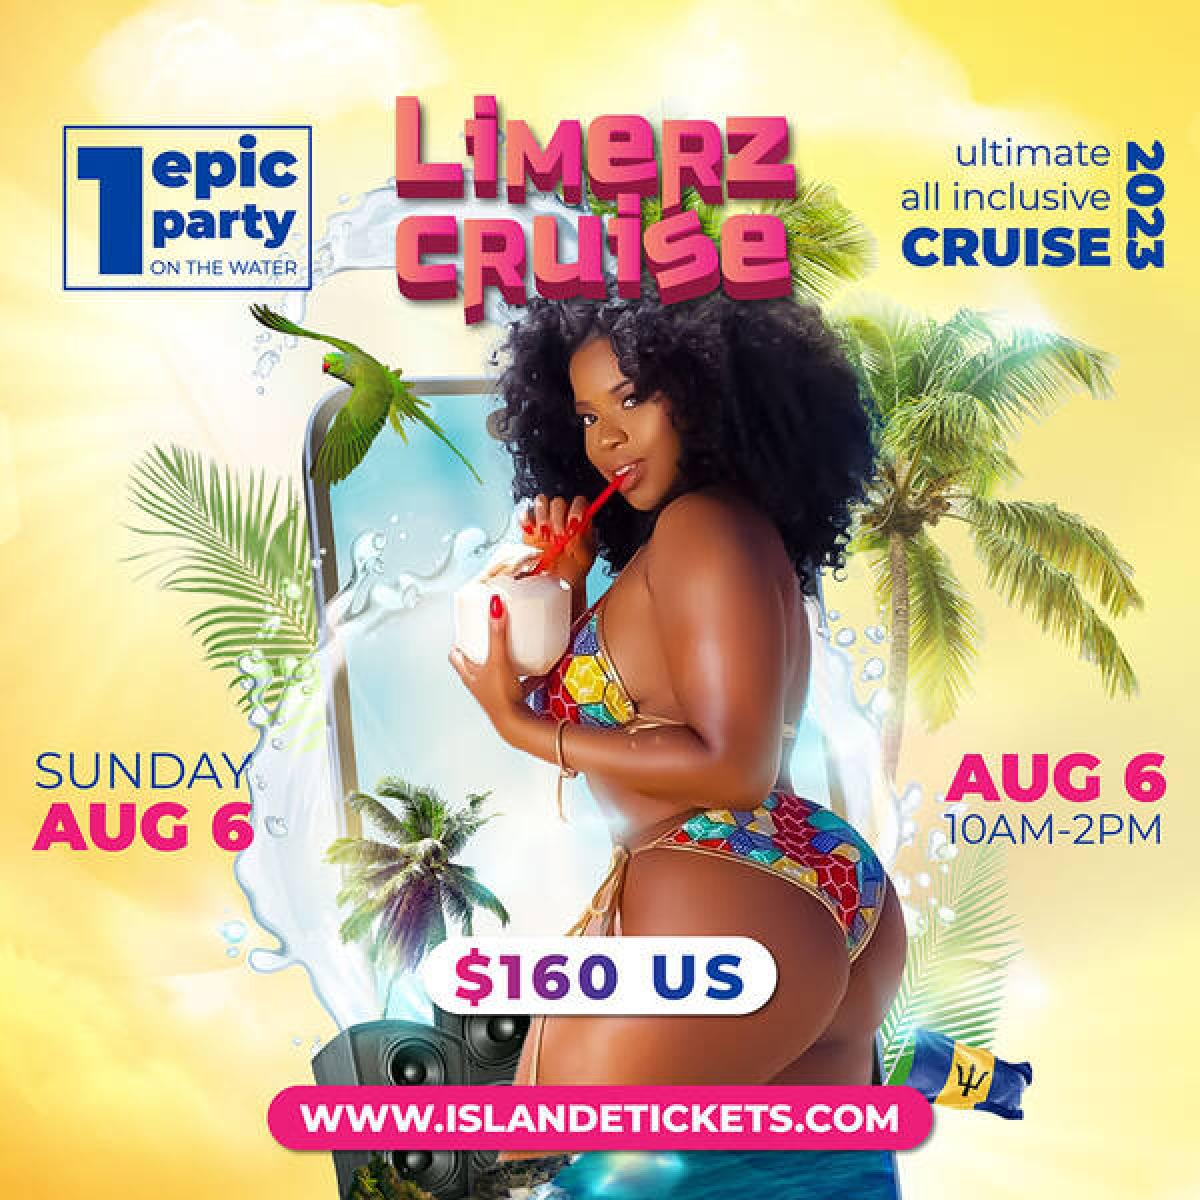 Limerz Cruise flyer or graphic.